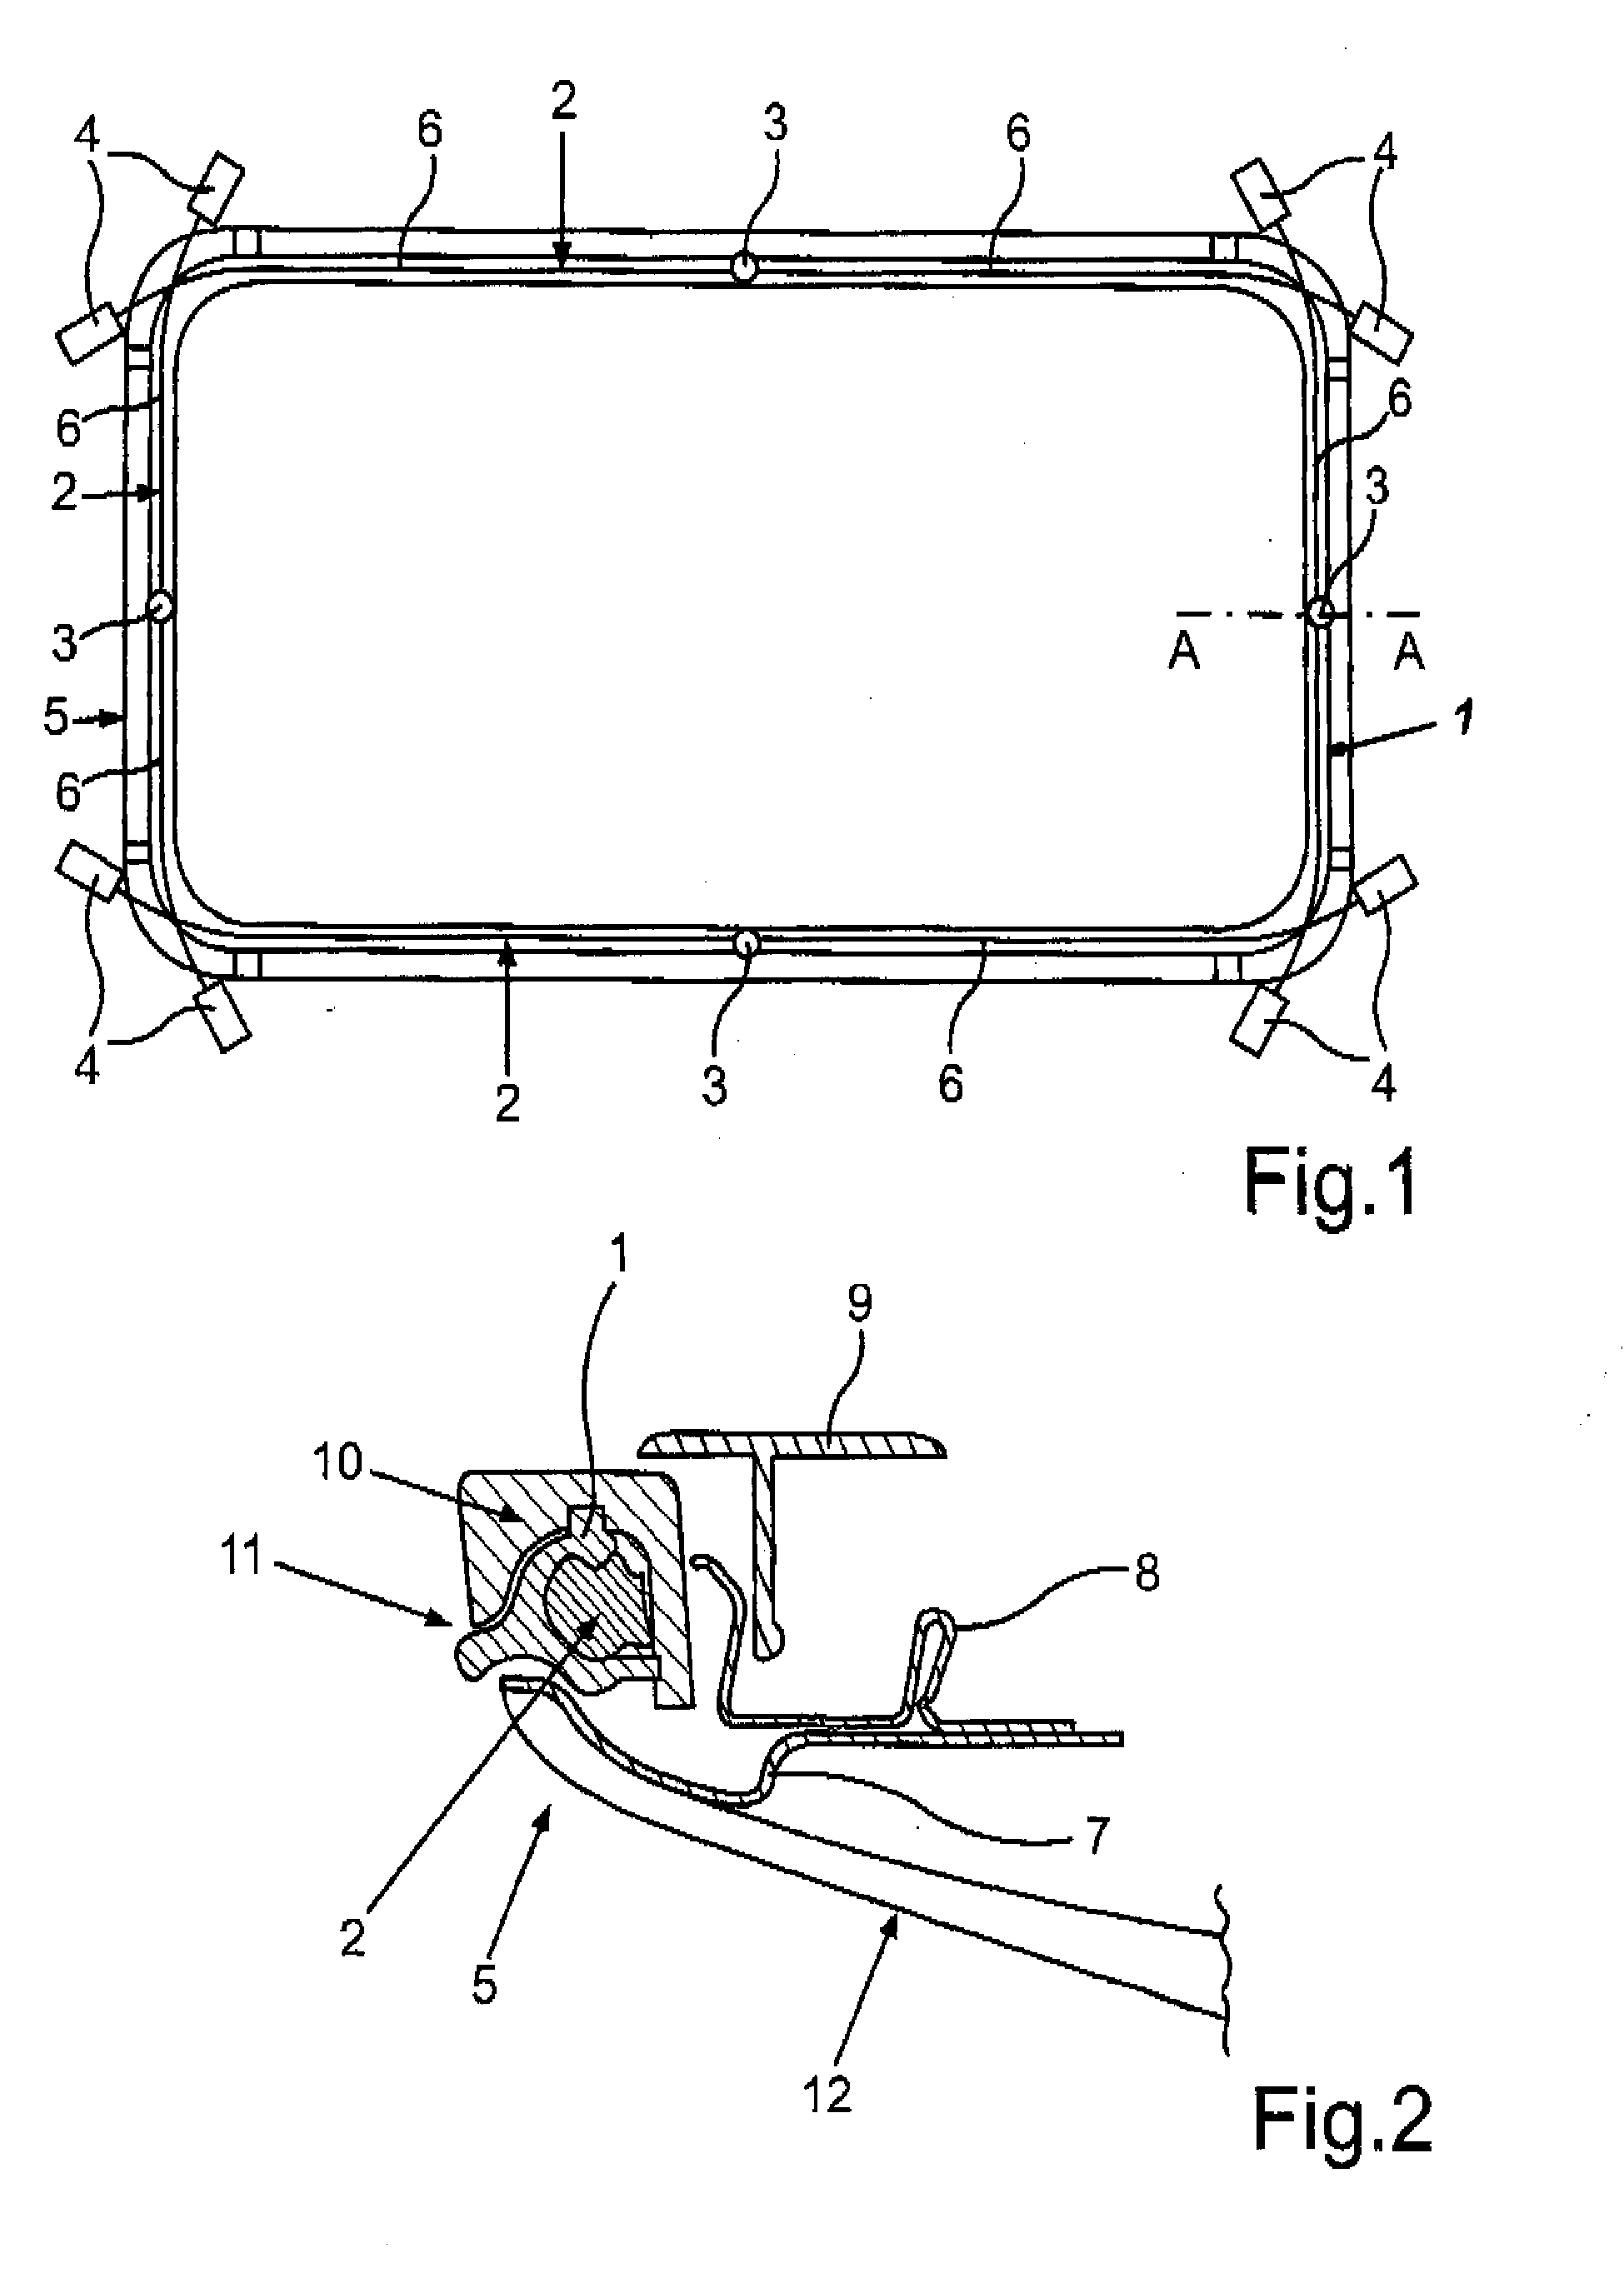 Peripheral illumination device for a vehicle component